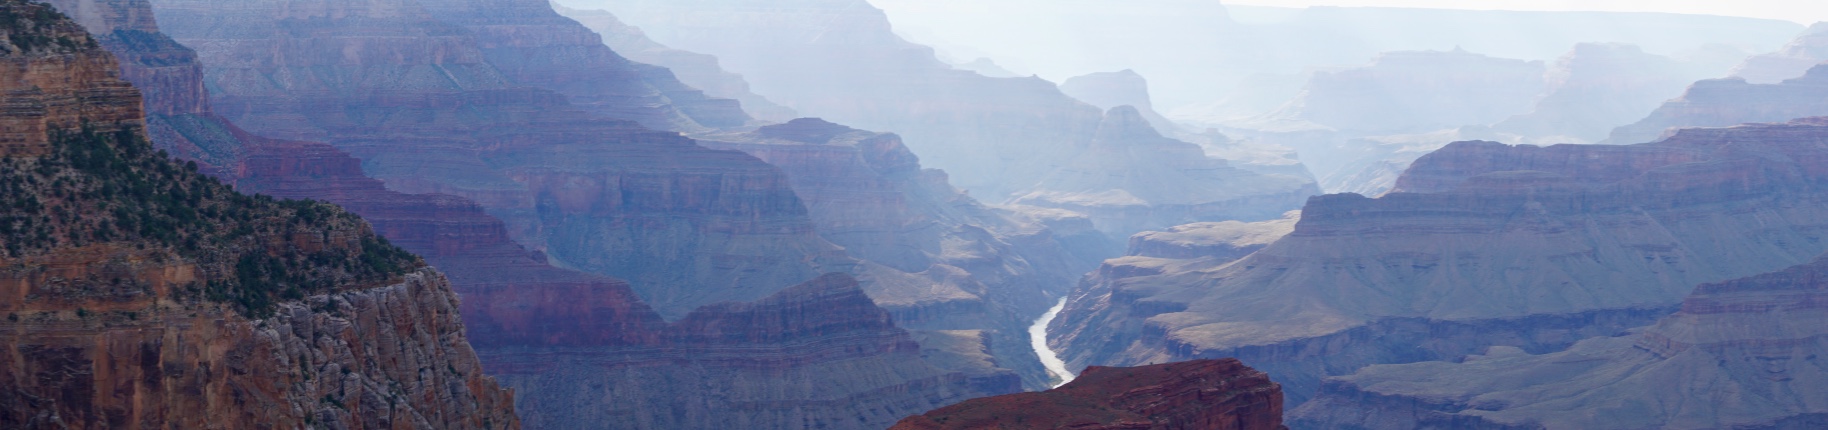 Itinerary to visit the Grand Canyon